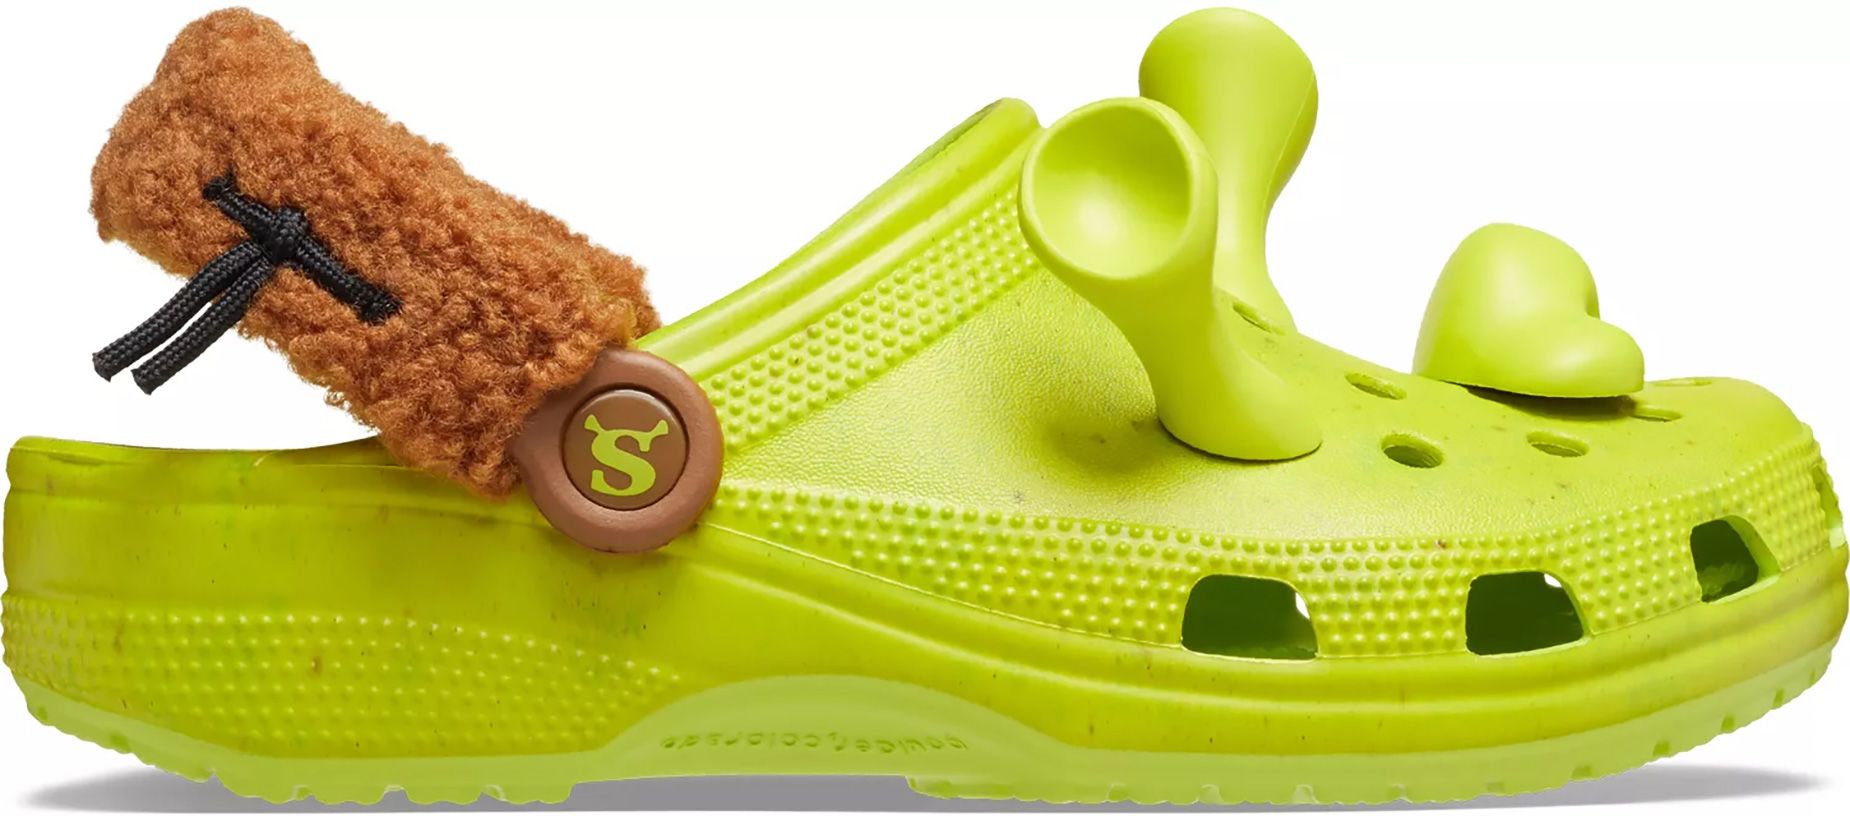 Shrek X Crocs  Shroc Review From The Inside Out 